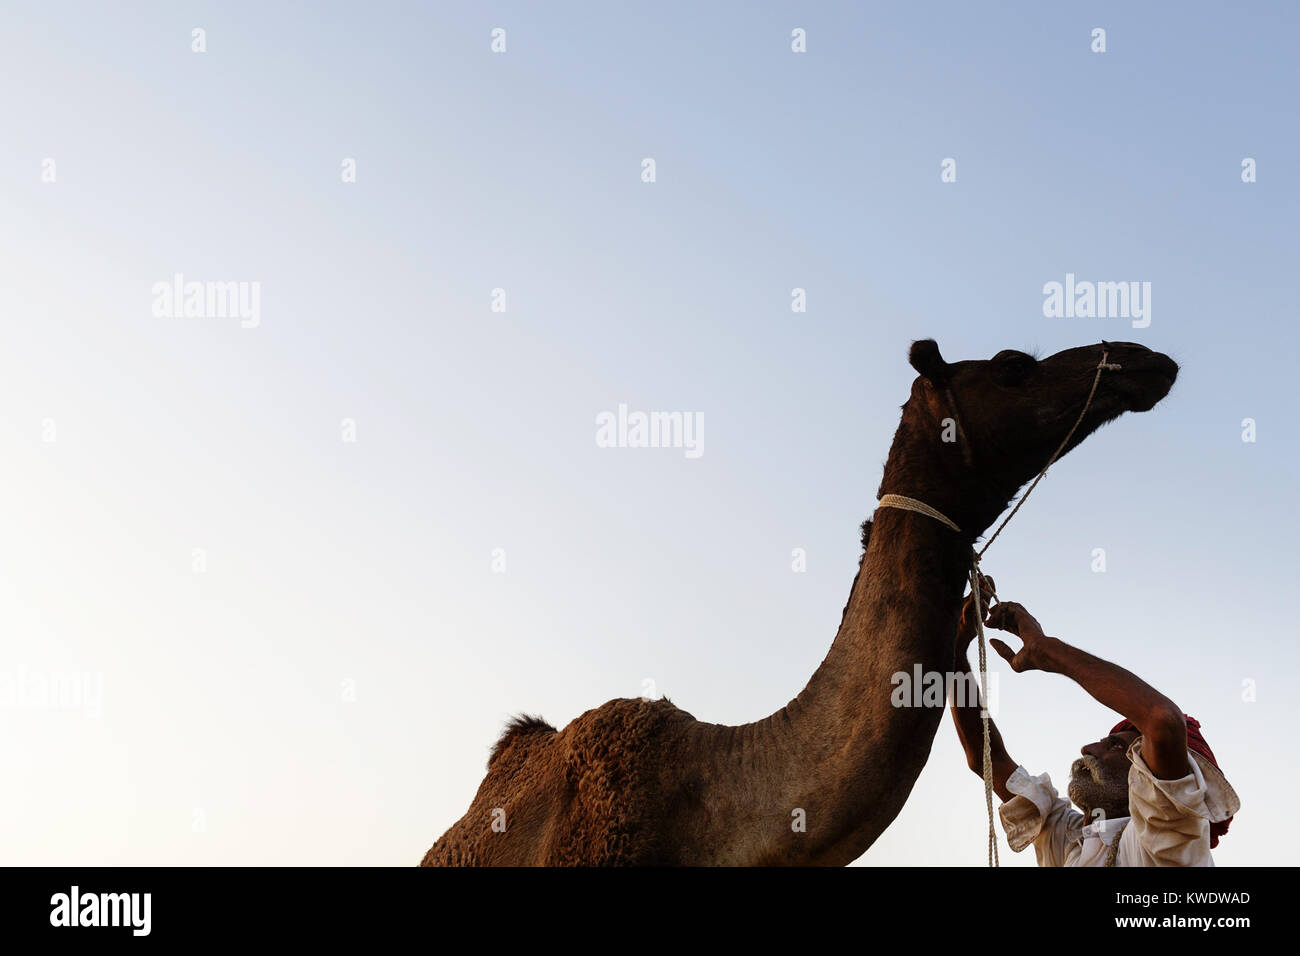 Scene at Pushkar Camel Fair, traders trying to tame disobedient camel, Rajasthan, India Stock Photo